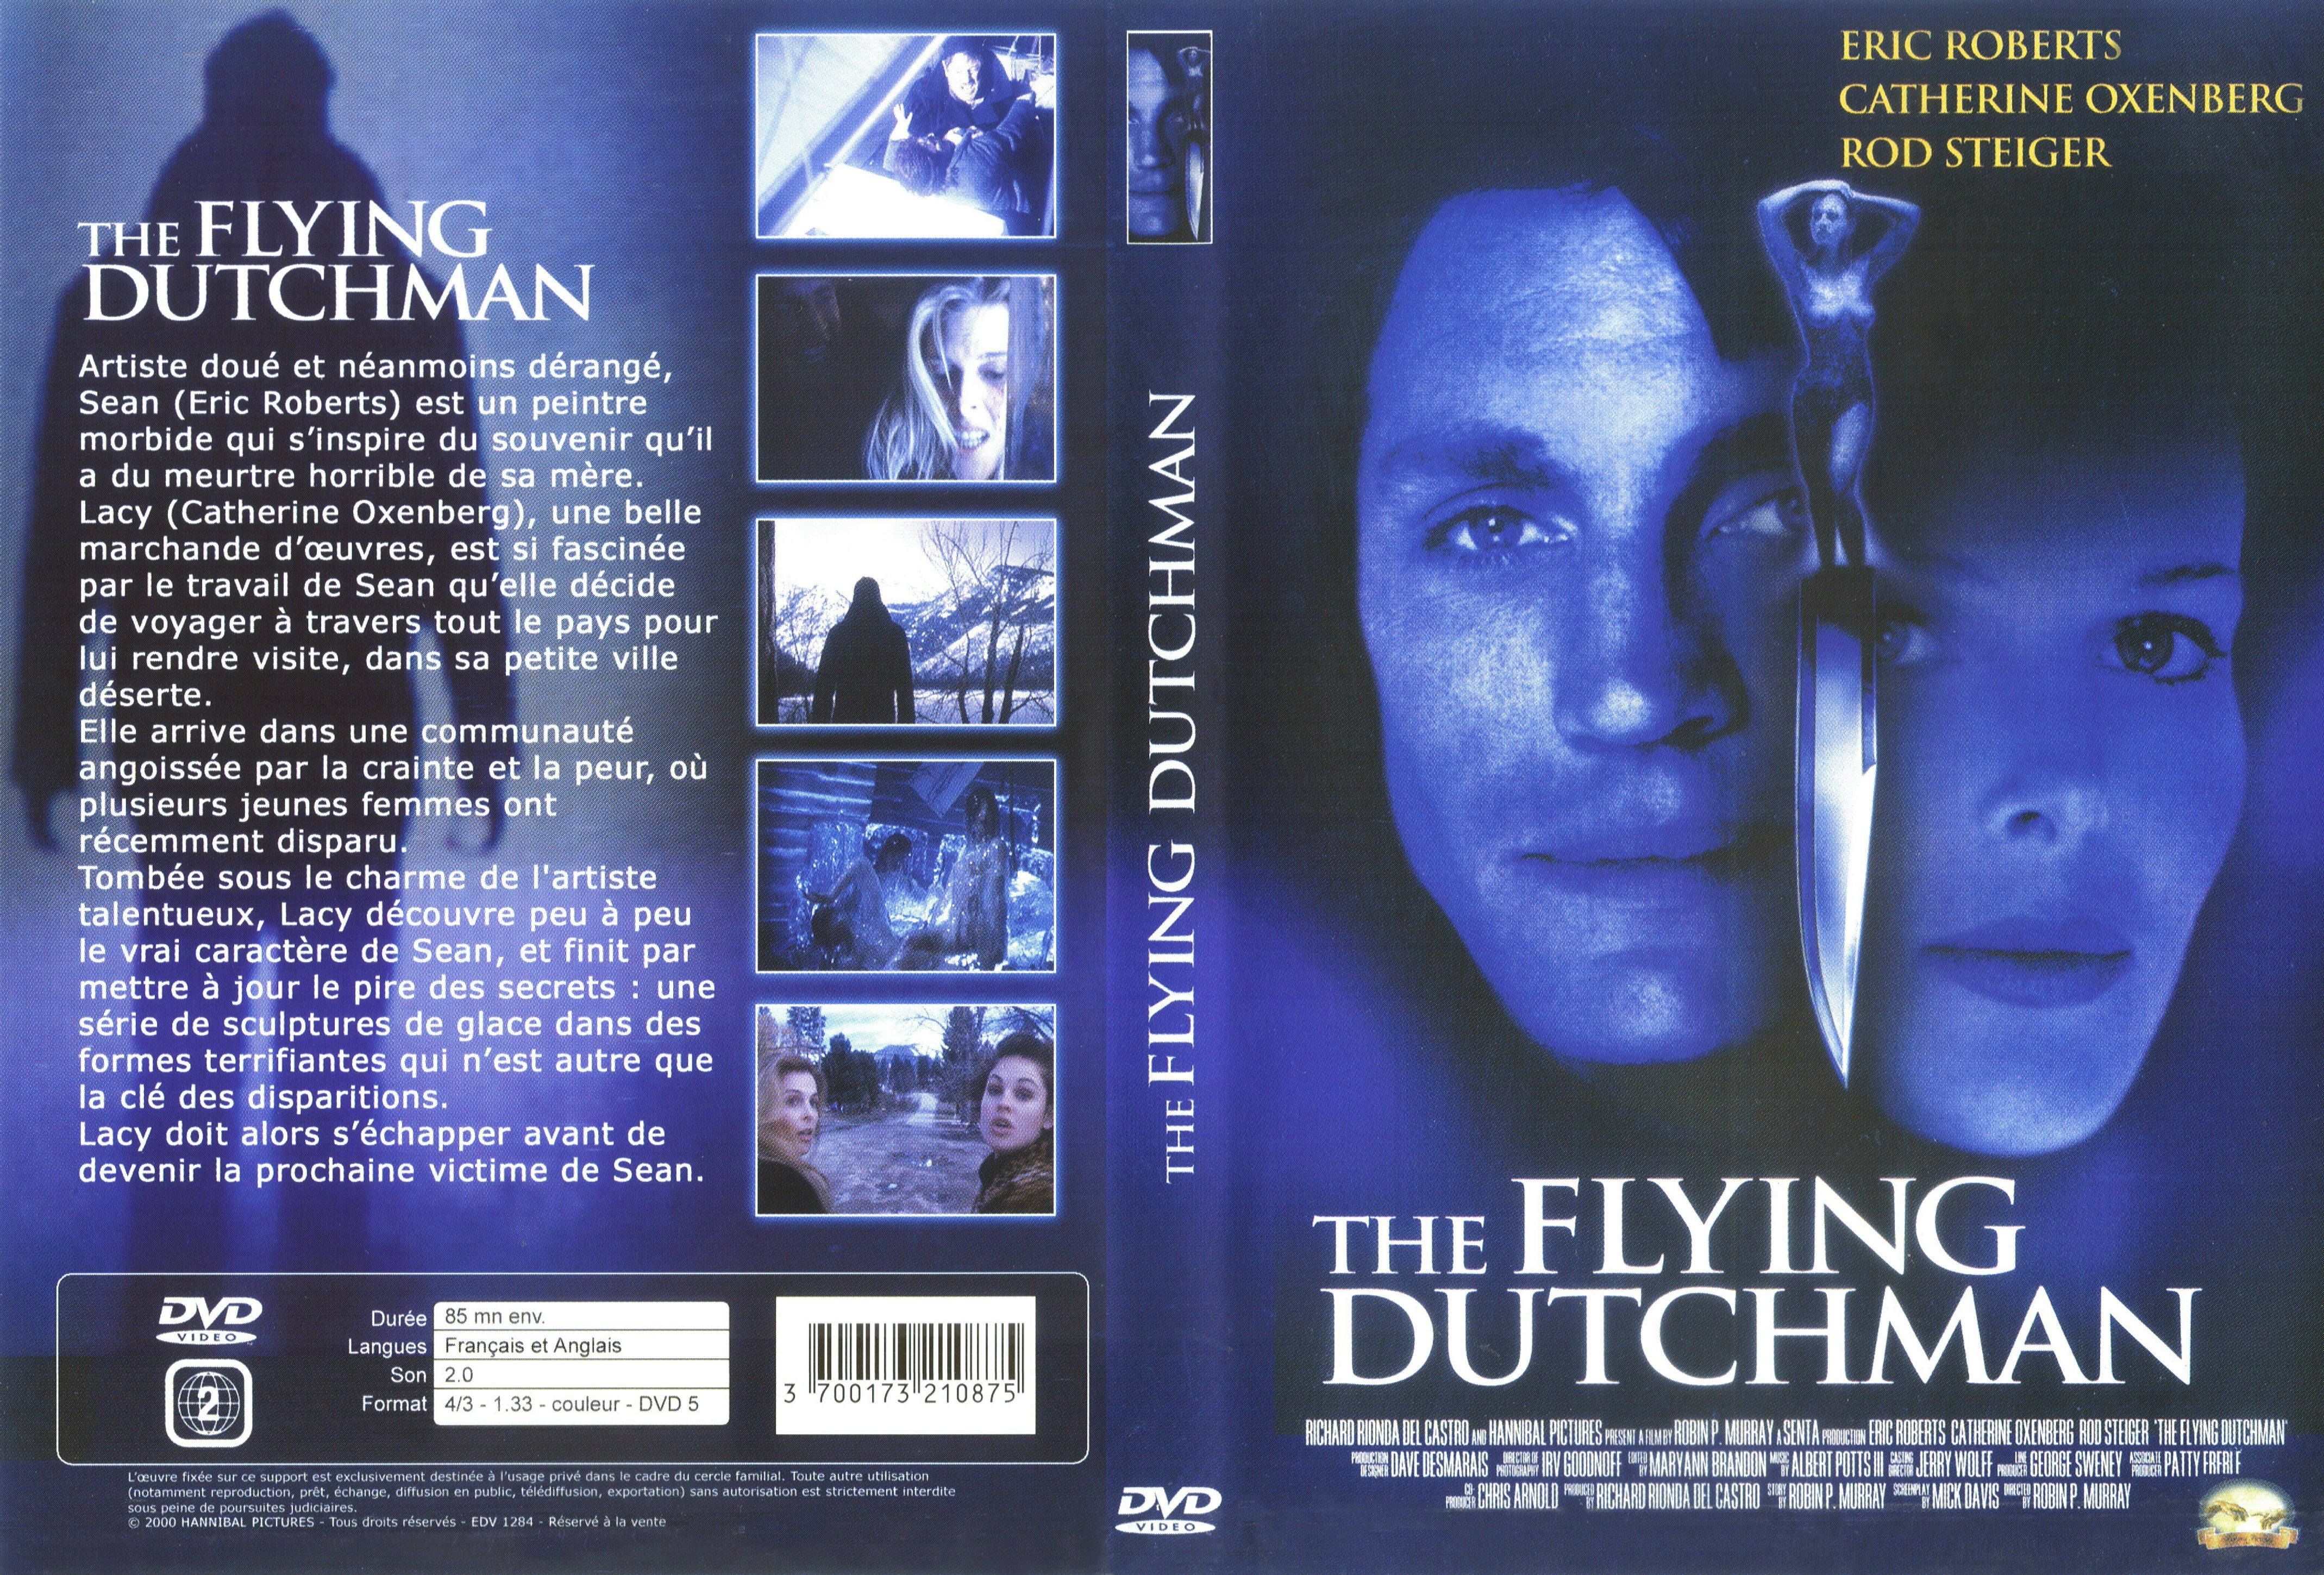 Jaquette DVD The flying dutchman